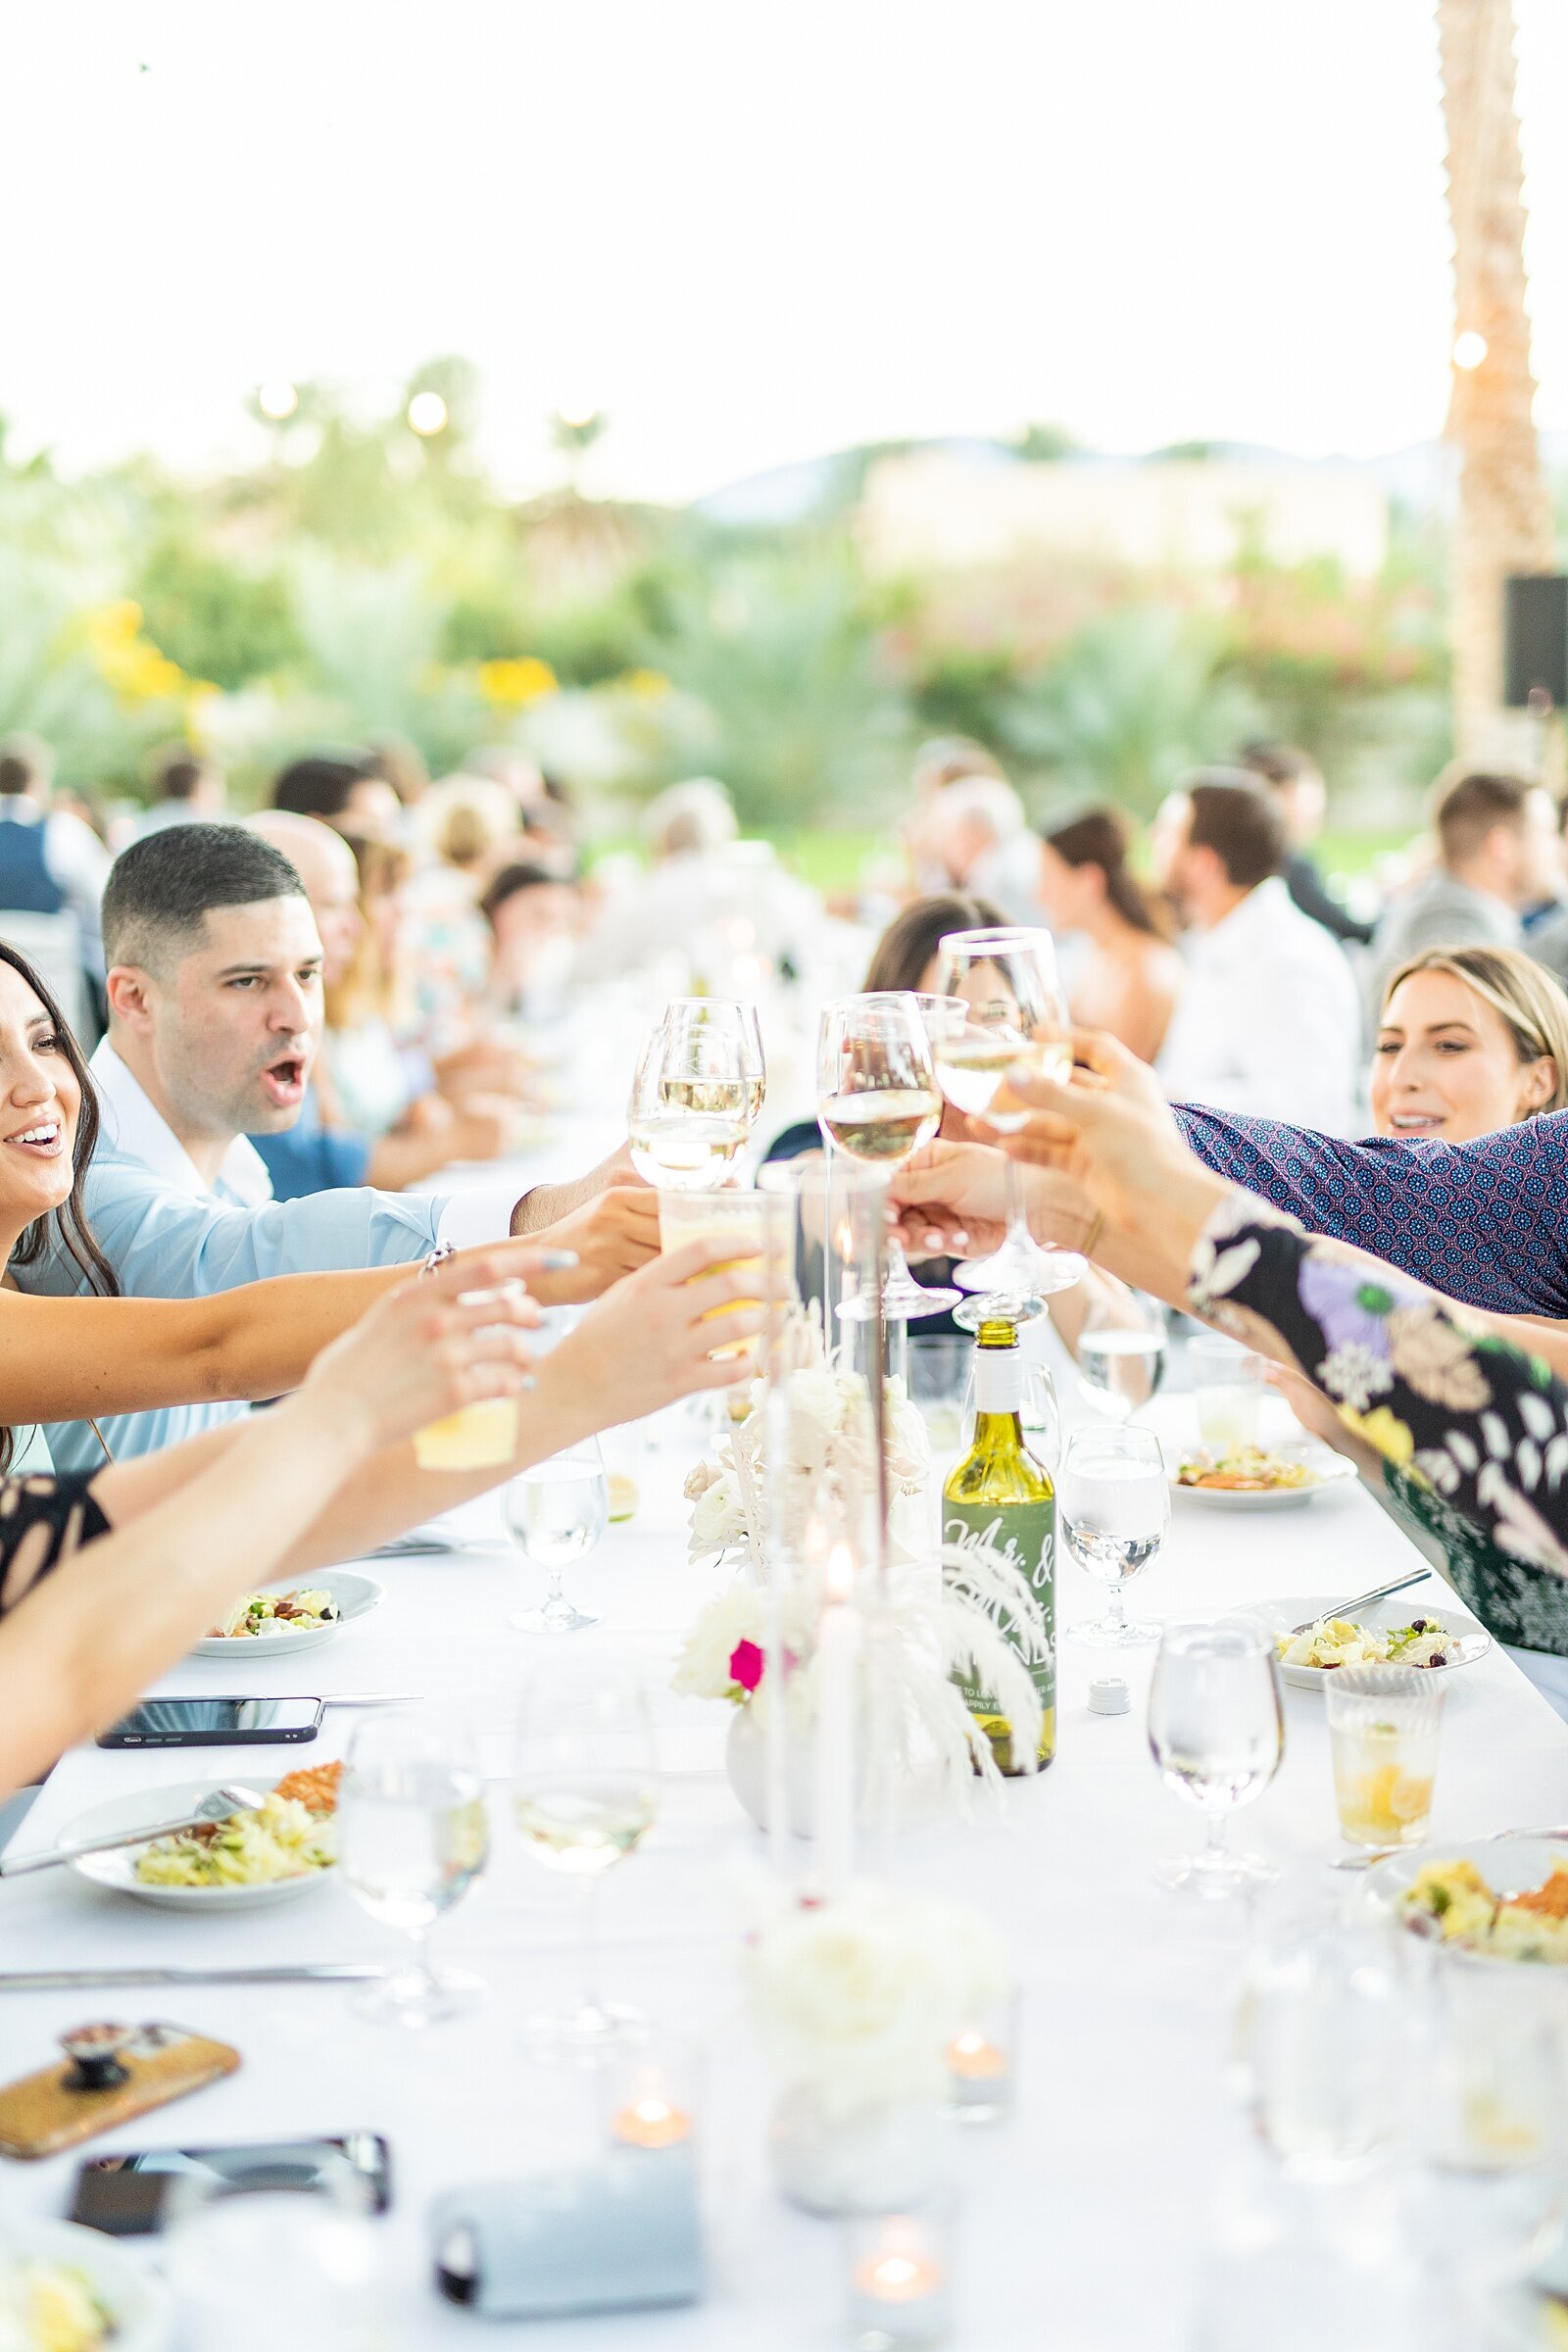 Wedding guests clinking drinks at reception in Coachella.